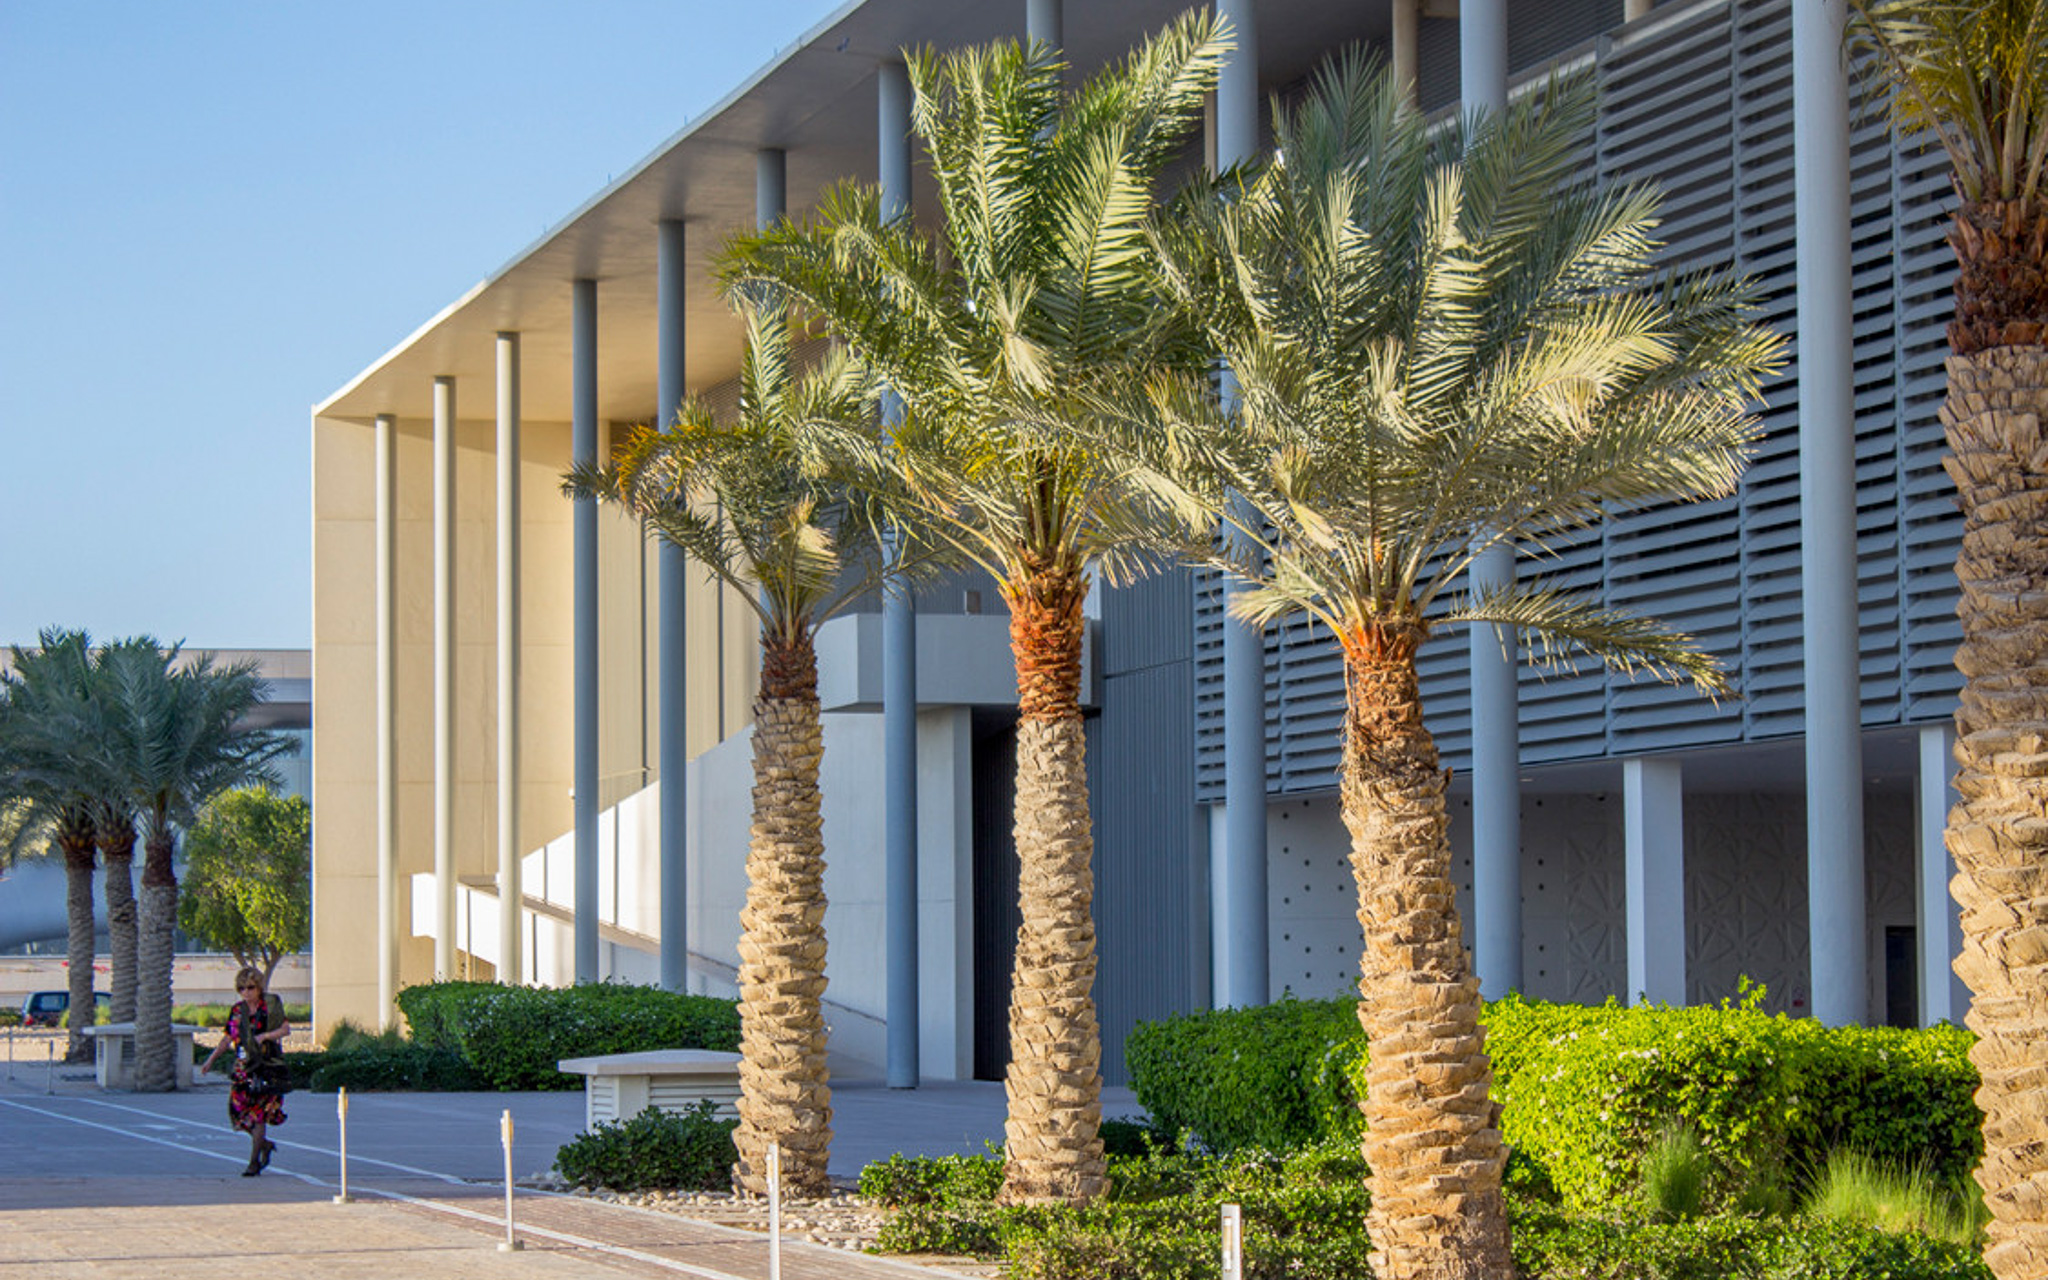 Exterior design of the medical college in Qatar, including native plants and modern architectural design